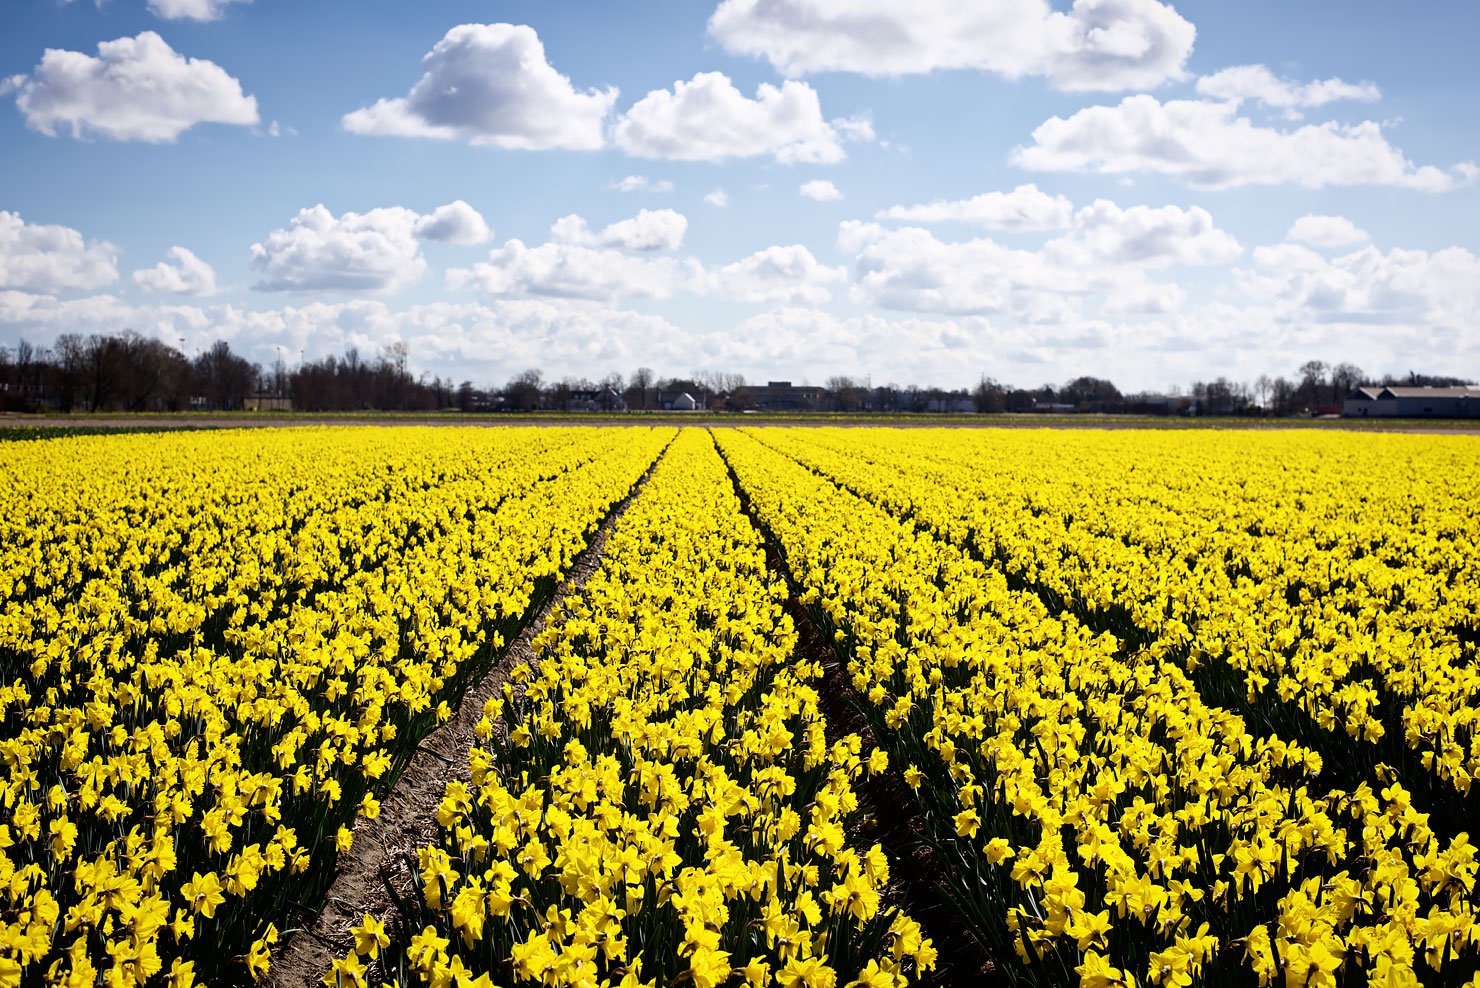 Daffodils in full bloom in the Netherlands